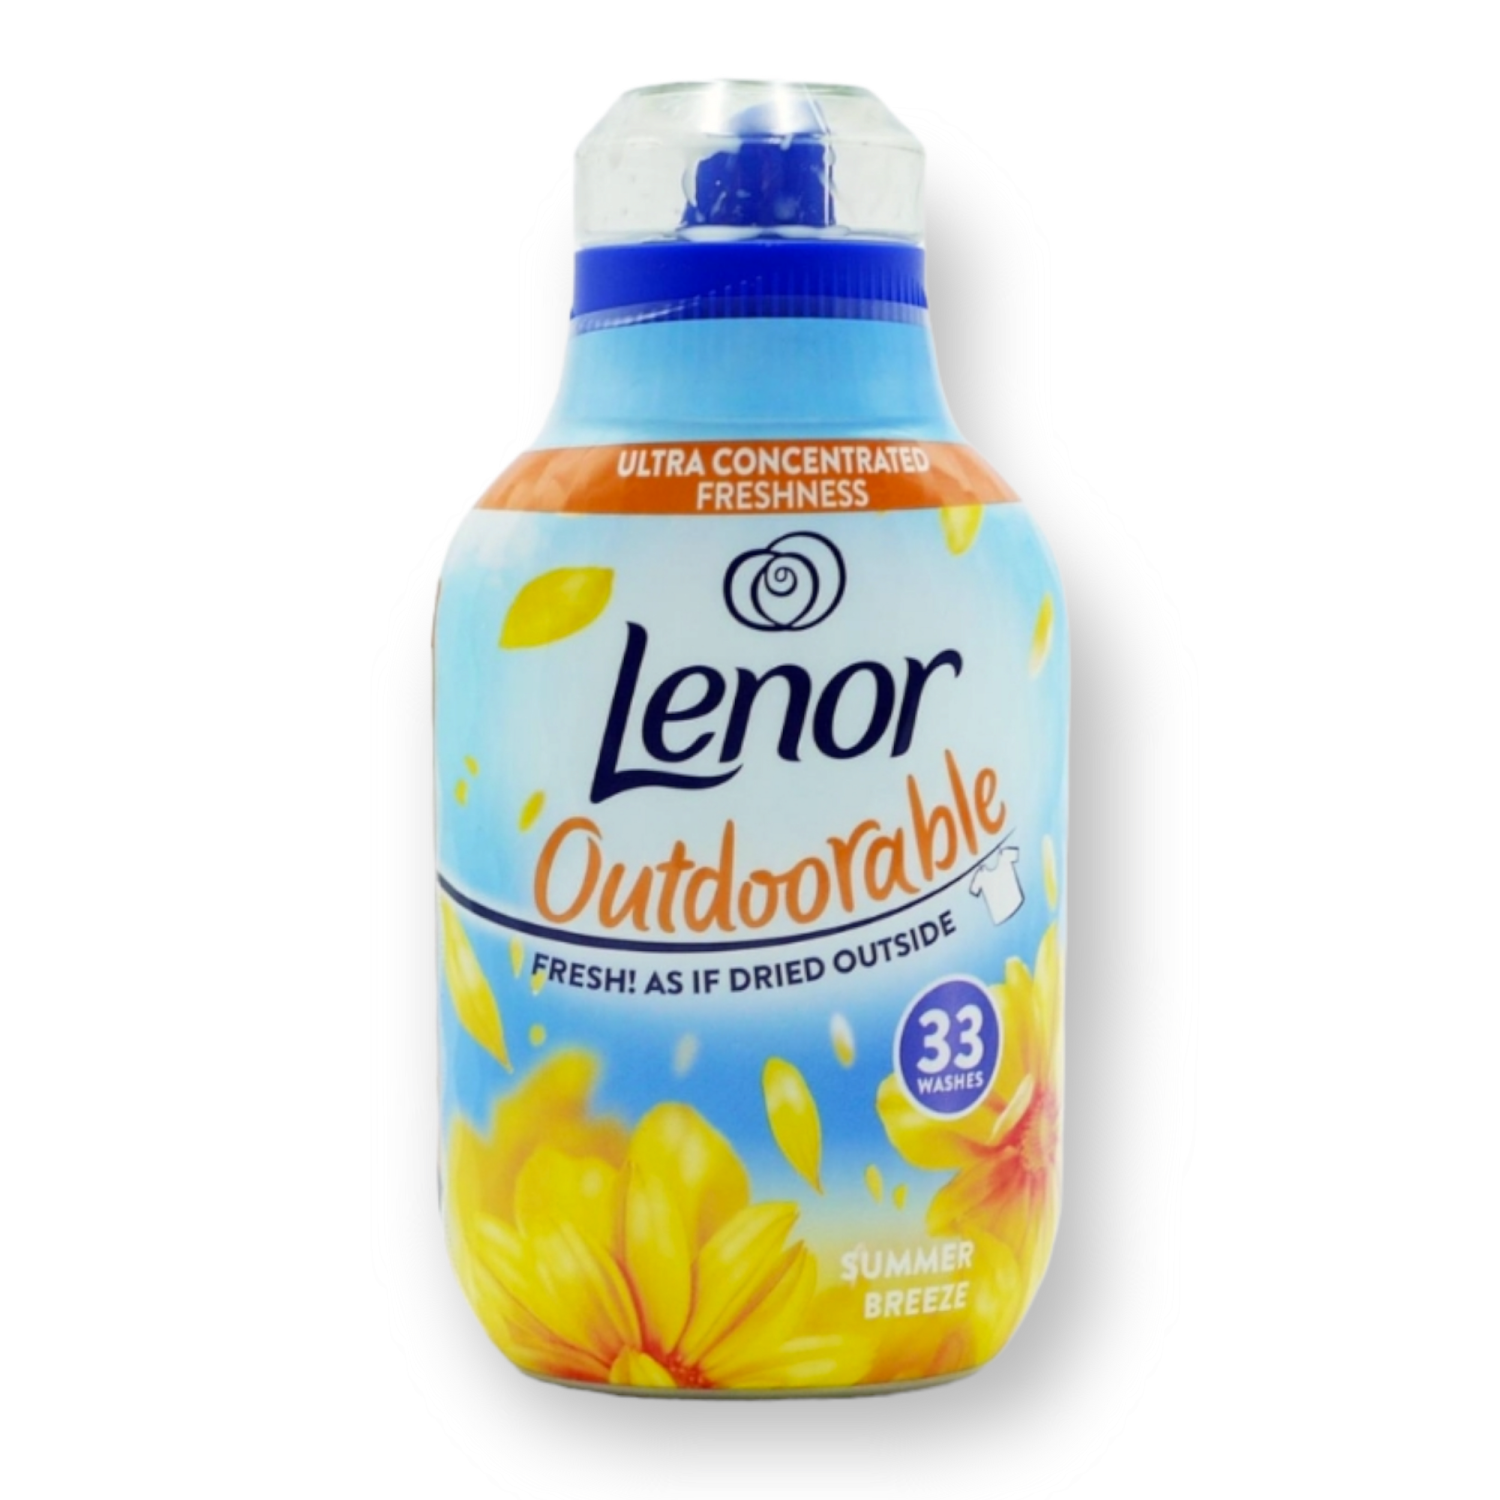 Lenor Outdoorable Summer Breeze Fabric Conditioner 462ml